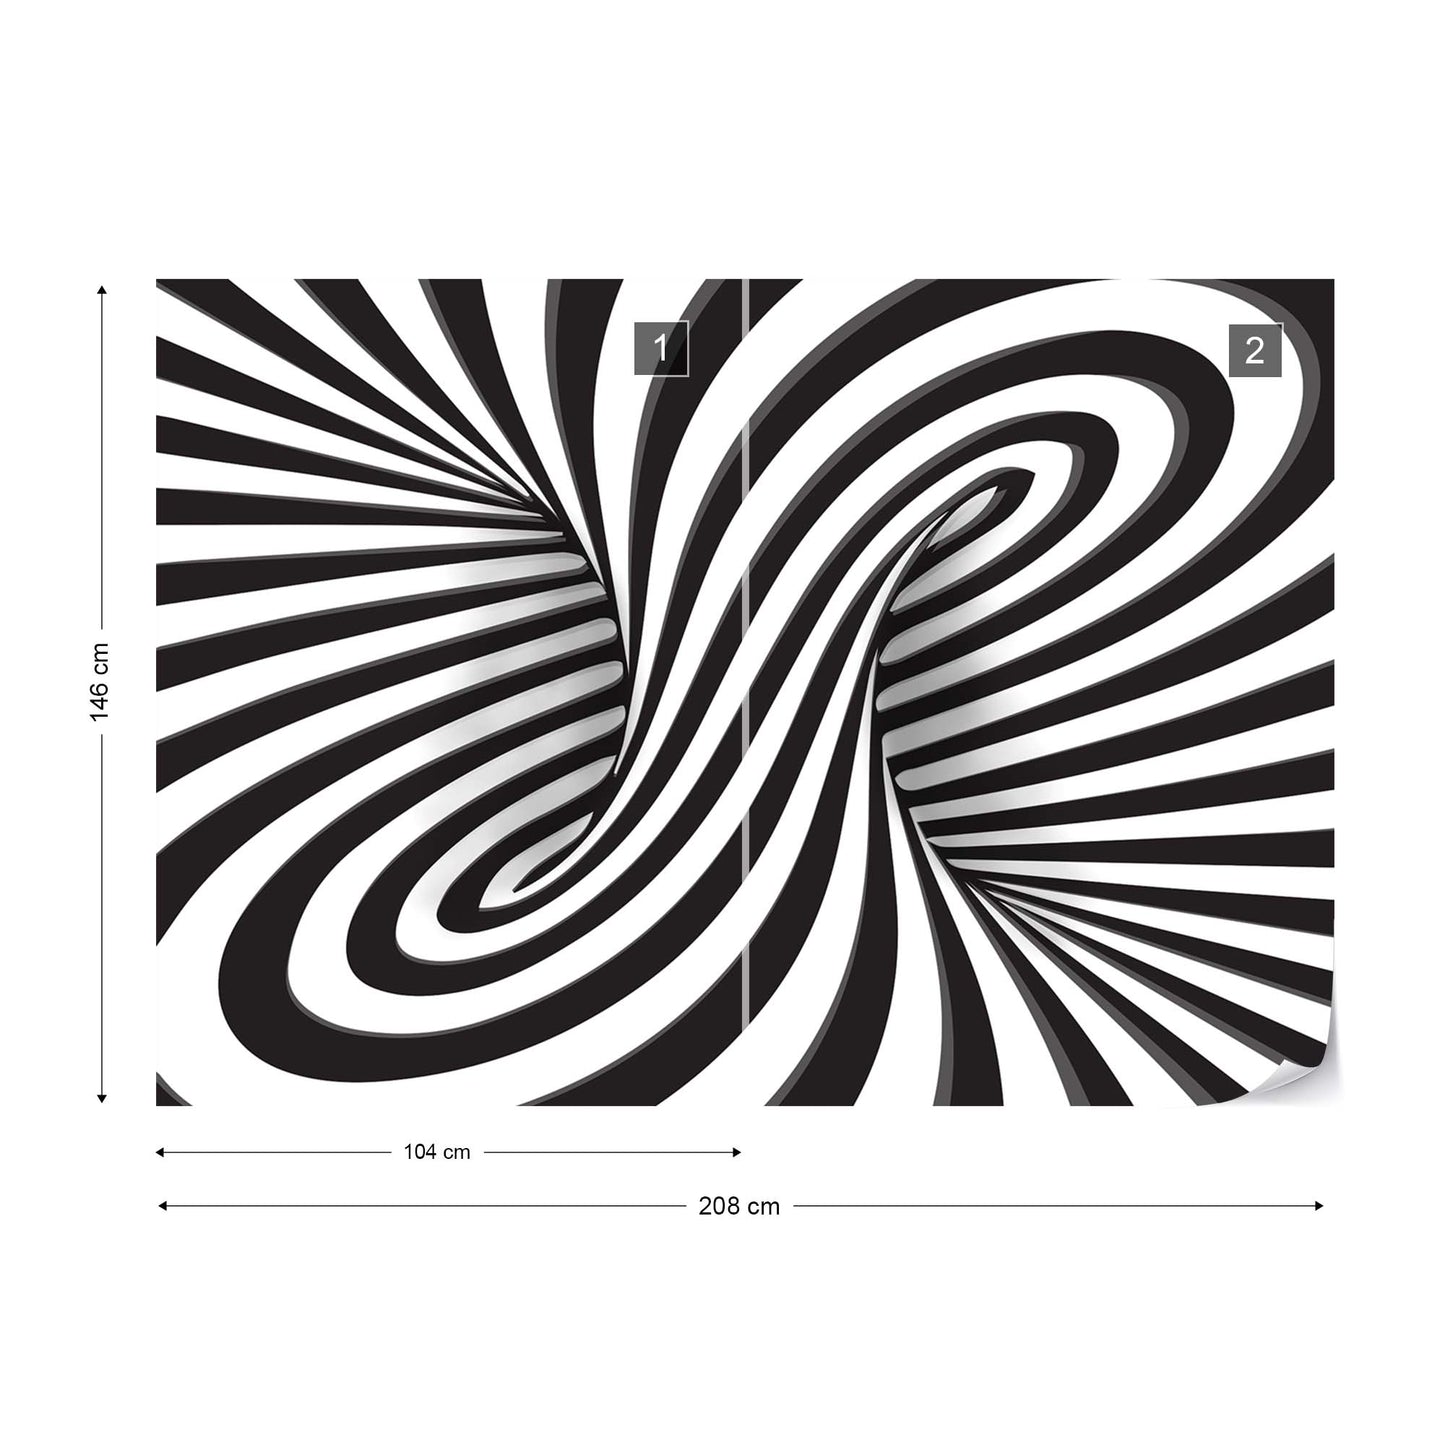 3D Black And White Twister Photo Wallpaper Wall Mural - USTAD HOME